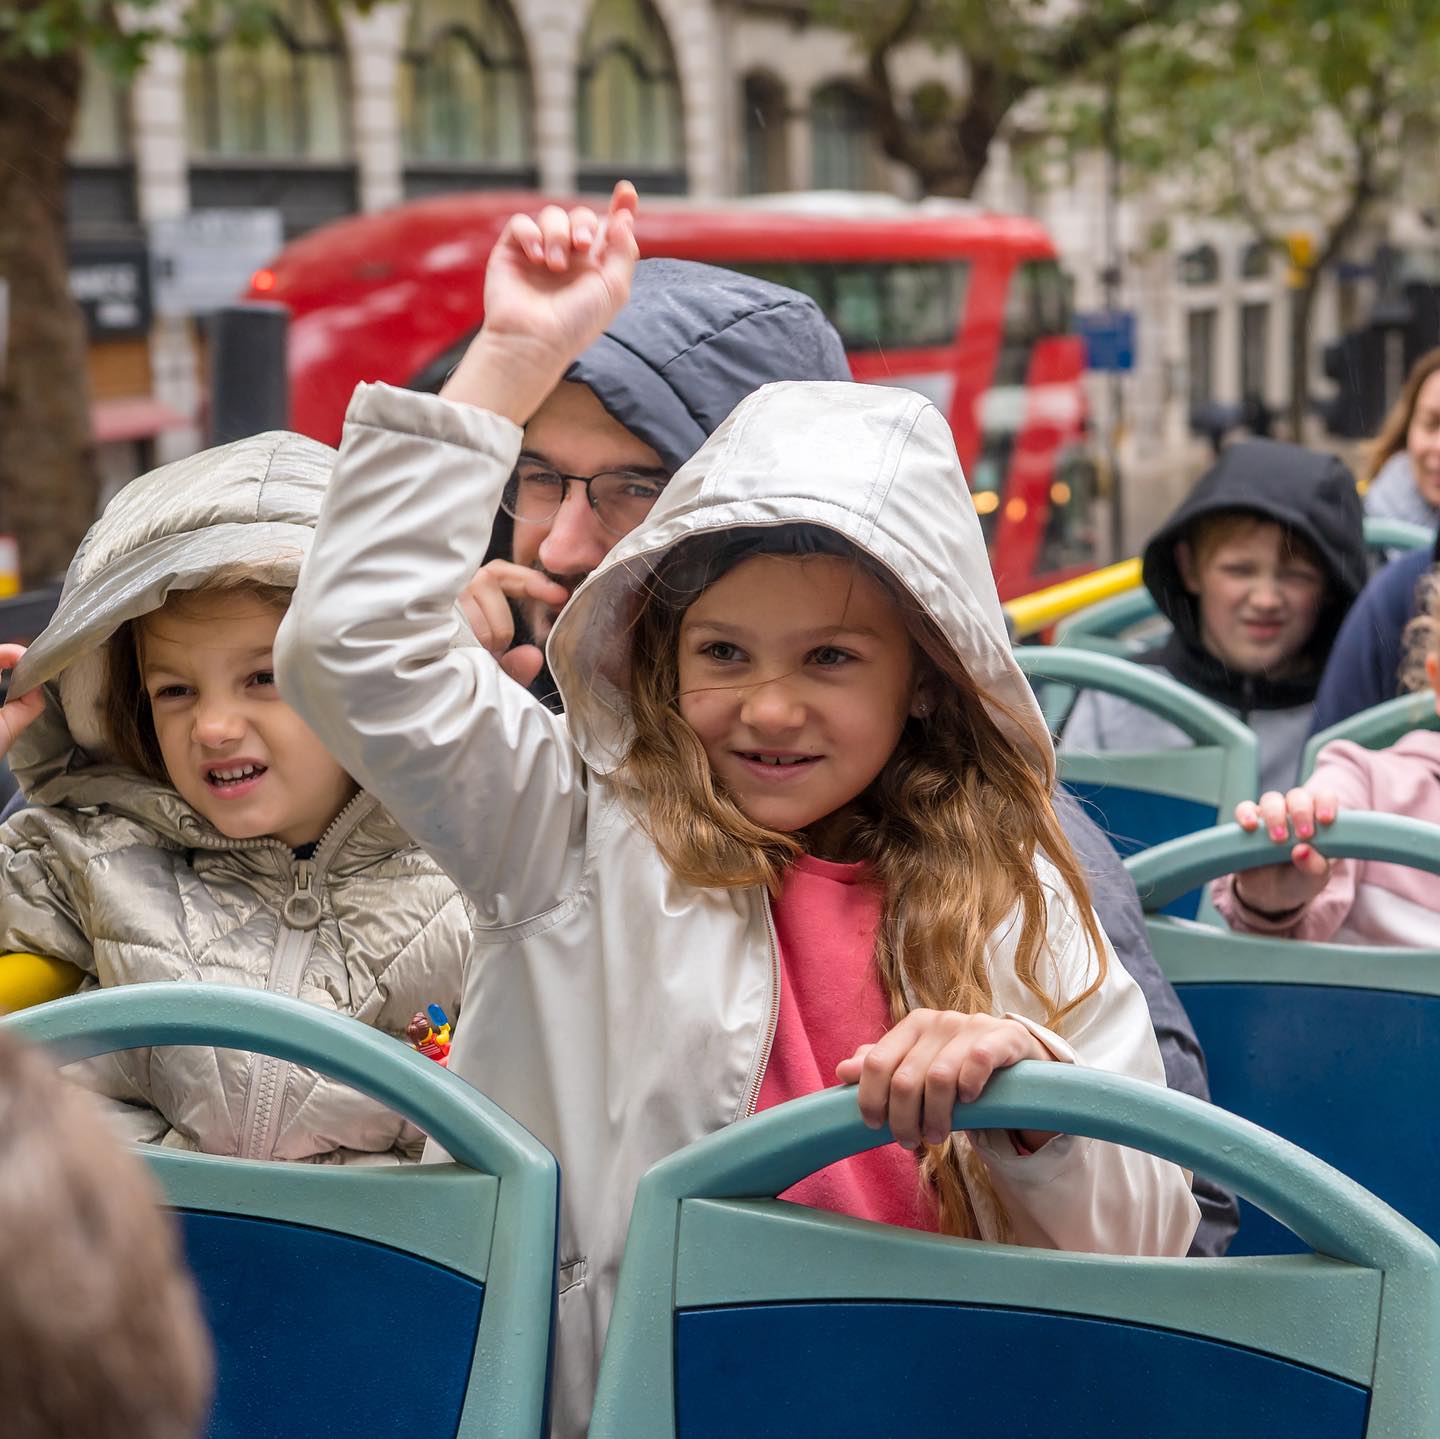 Tootbus Kids Bus Tour: Save Up to 20% with Wowcher's Exclusive Deal